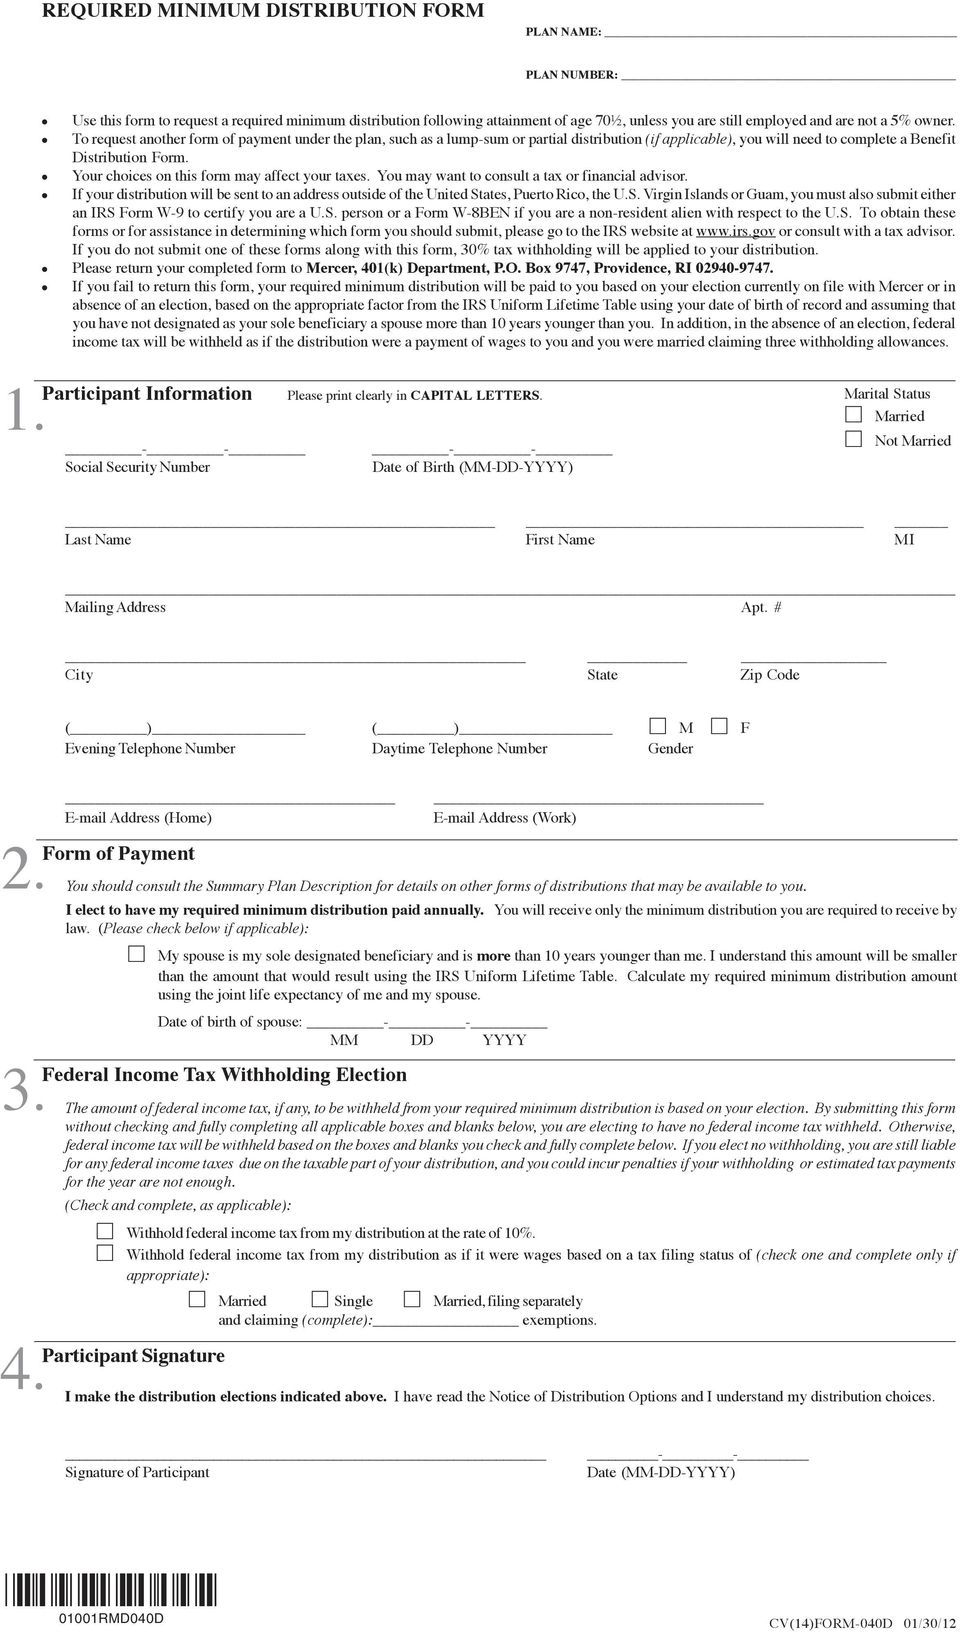 Your choices on this form may affect your taxes. You may want to consult a tax or financial advisor. If your distribution will be sent to an address outside of the United St